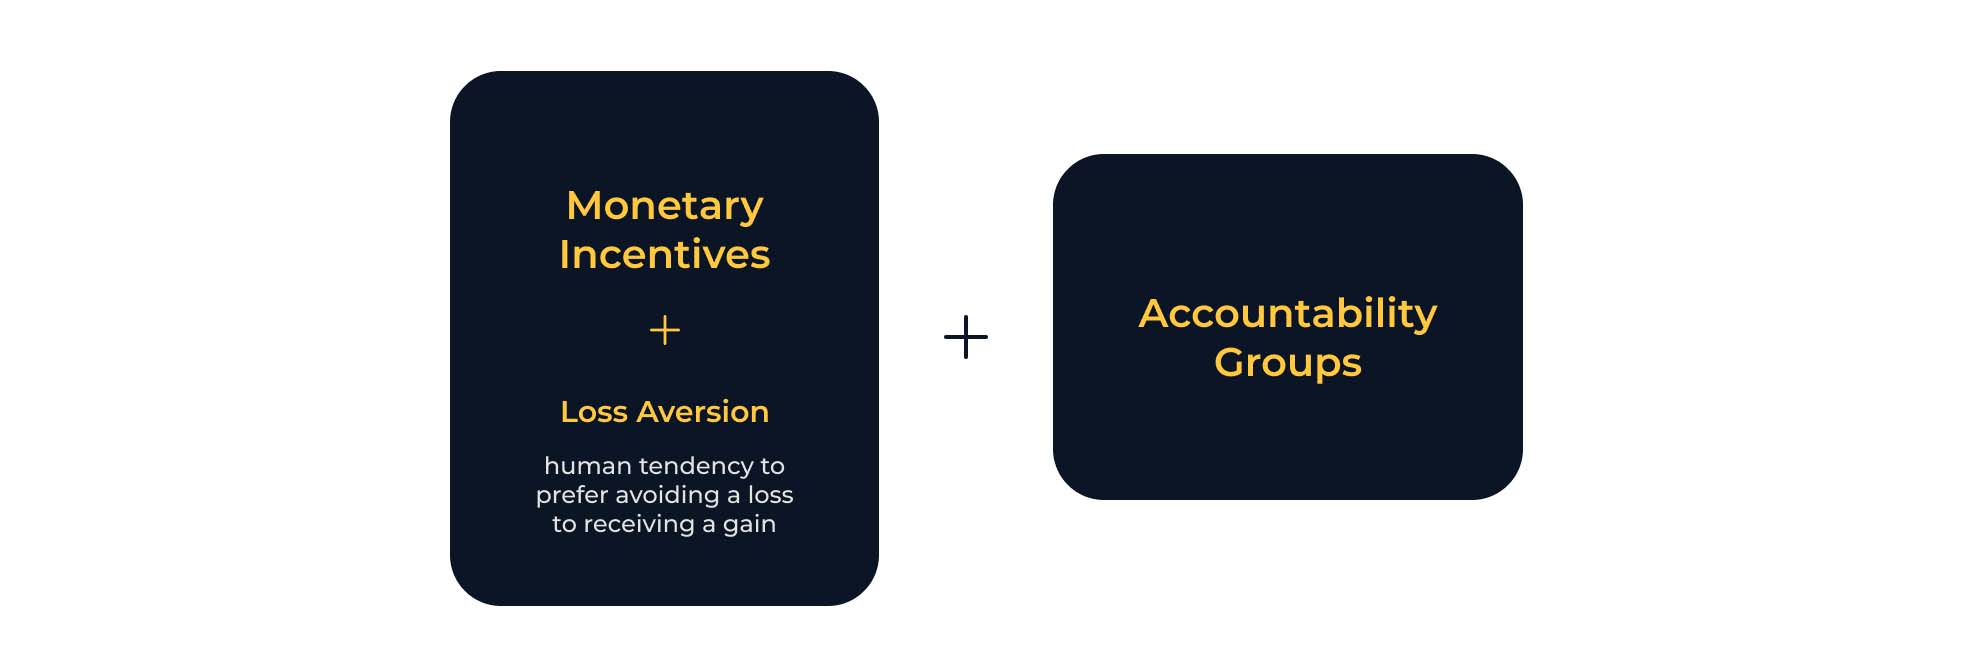 monetary incentives and accountability groups